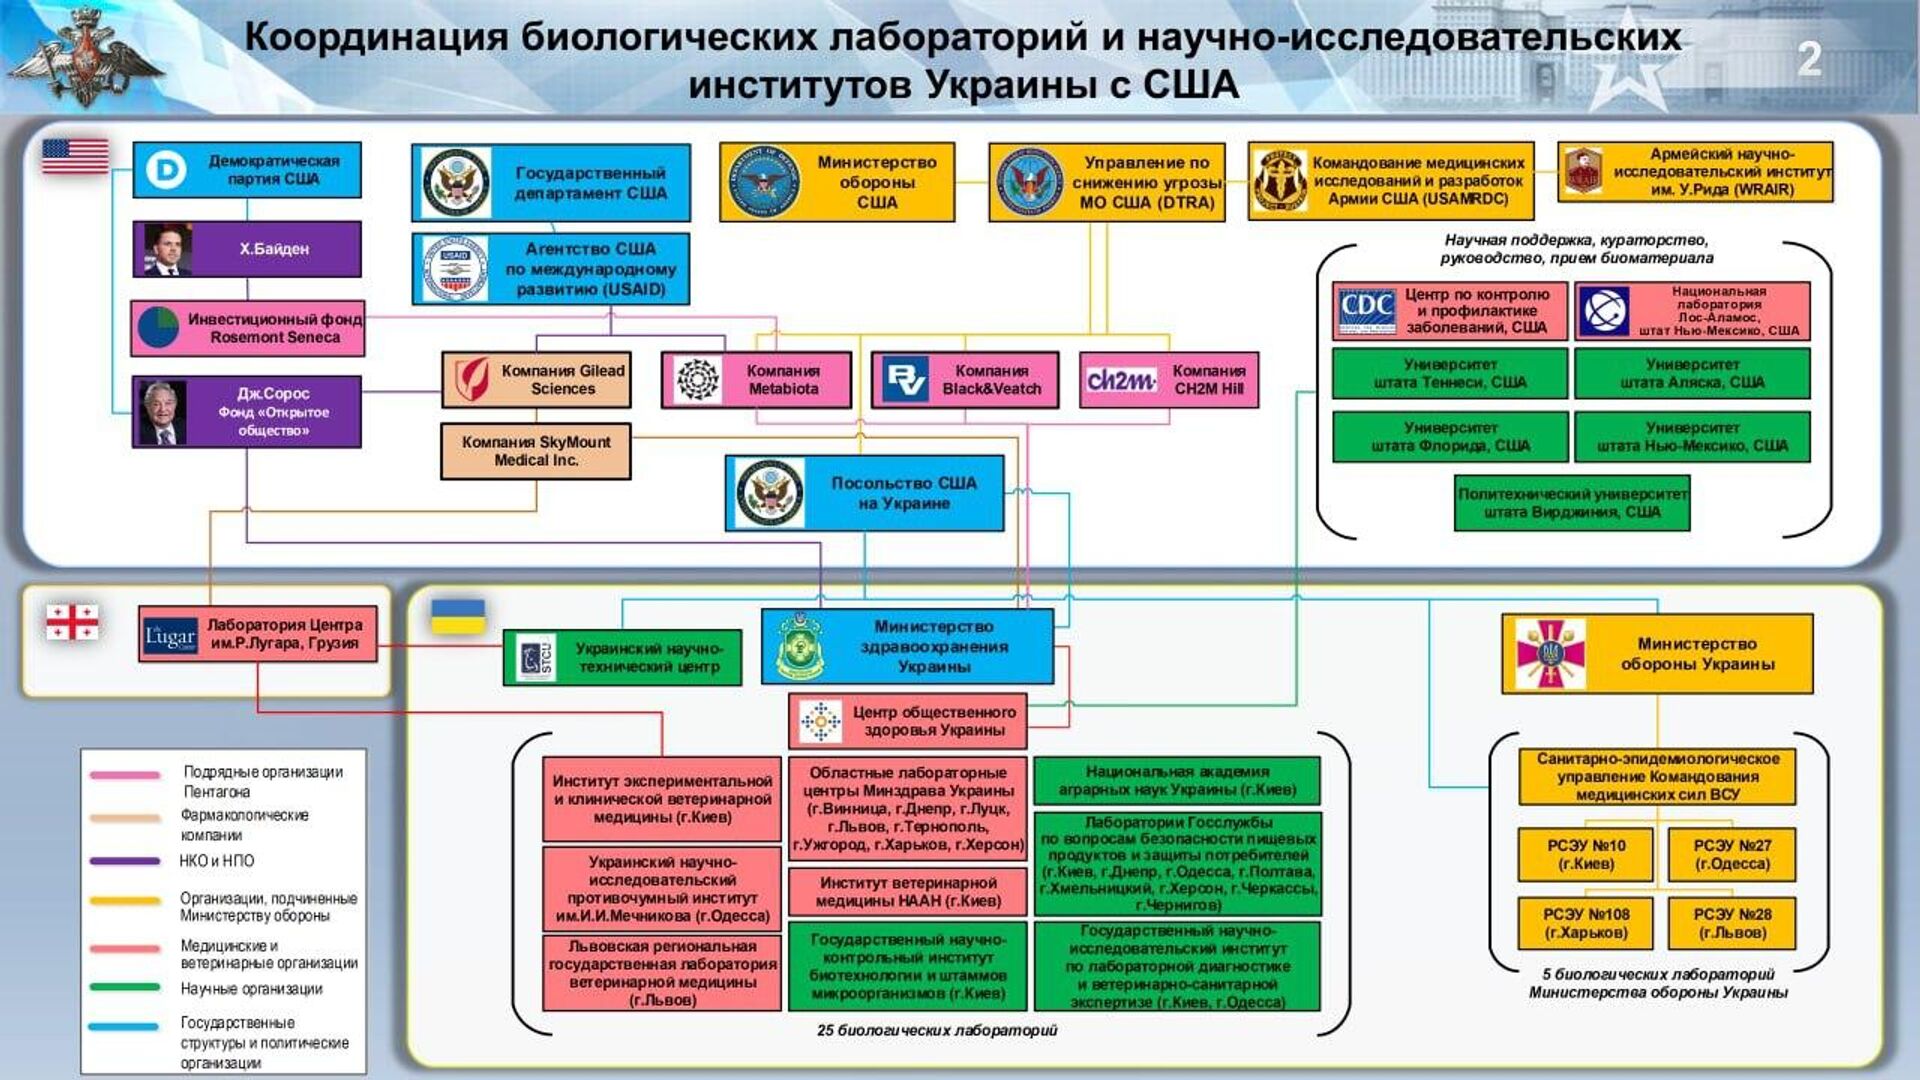 Russian Defence Ministry presentation detailing coordination between Ukraine-based labs and US agencies and companies, including Hunter Biden and George Soros (far left), the US State Department, USAID, Gilead Sciences, SkyMount Medical, Metabiota, Black&Veatch, CH2M Hill, the US Embassy in Ukraine (center) and the CDC, the National Laboratory at Los Alamos and the universities of Tennessee, Alaska, Florida, New Mexico and Virginia (right). Below, ties are shown to the Lugar Center in Georgia, the Ukrainian Ministry of Health and associated centers and institutes, and teh Ukrainian Defence Ministry's epidemiological departments. - Sputnik International, 1920, 24.03.2022